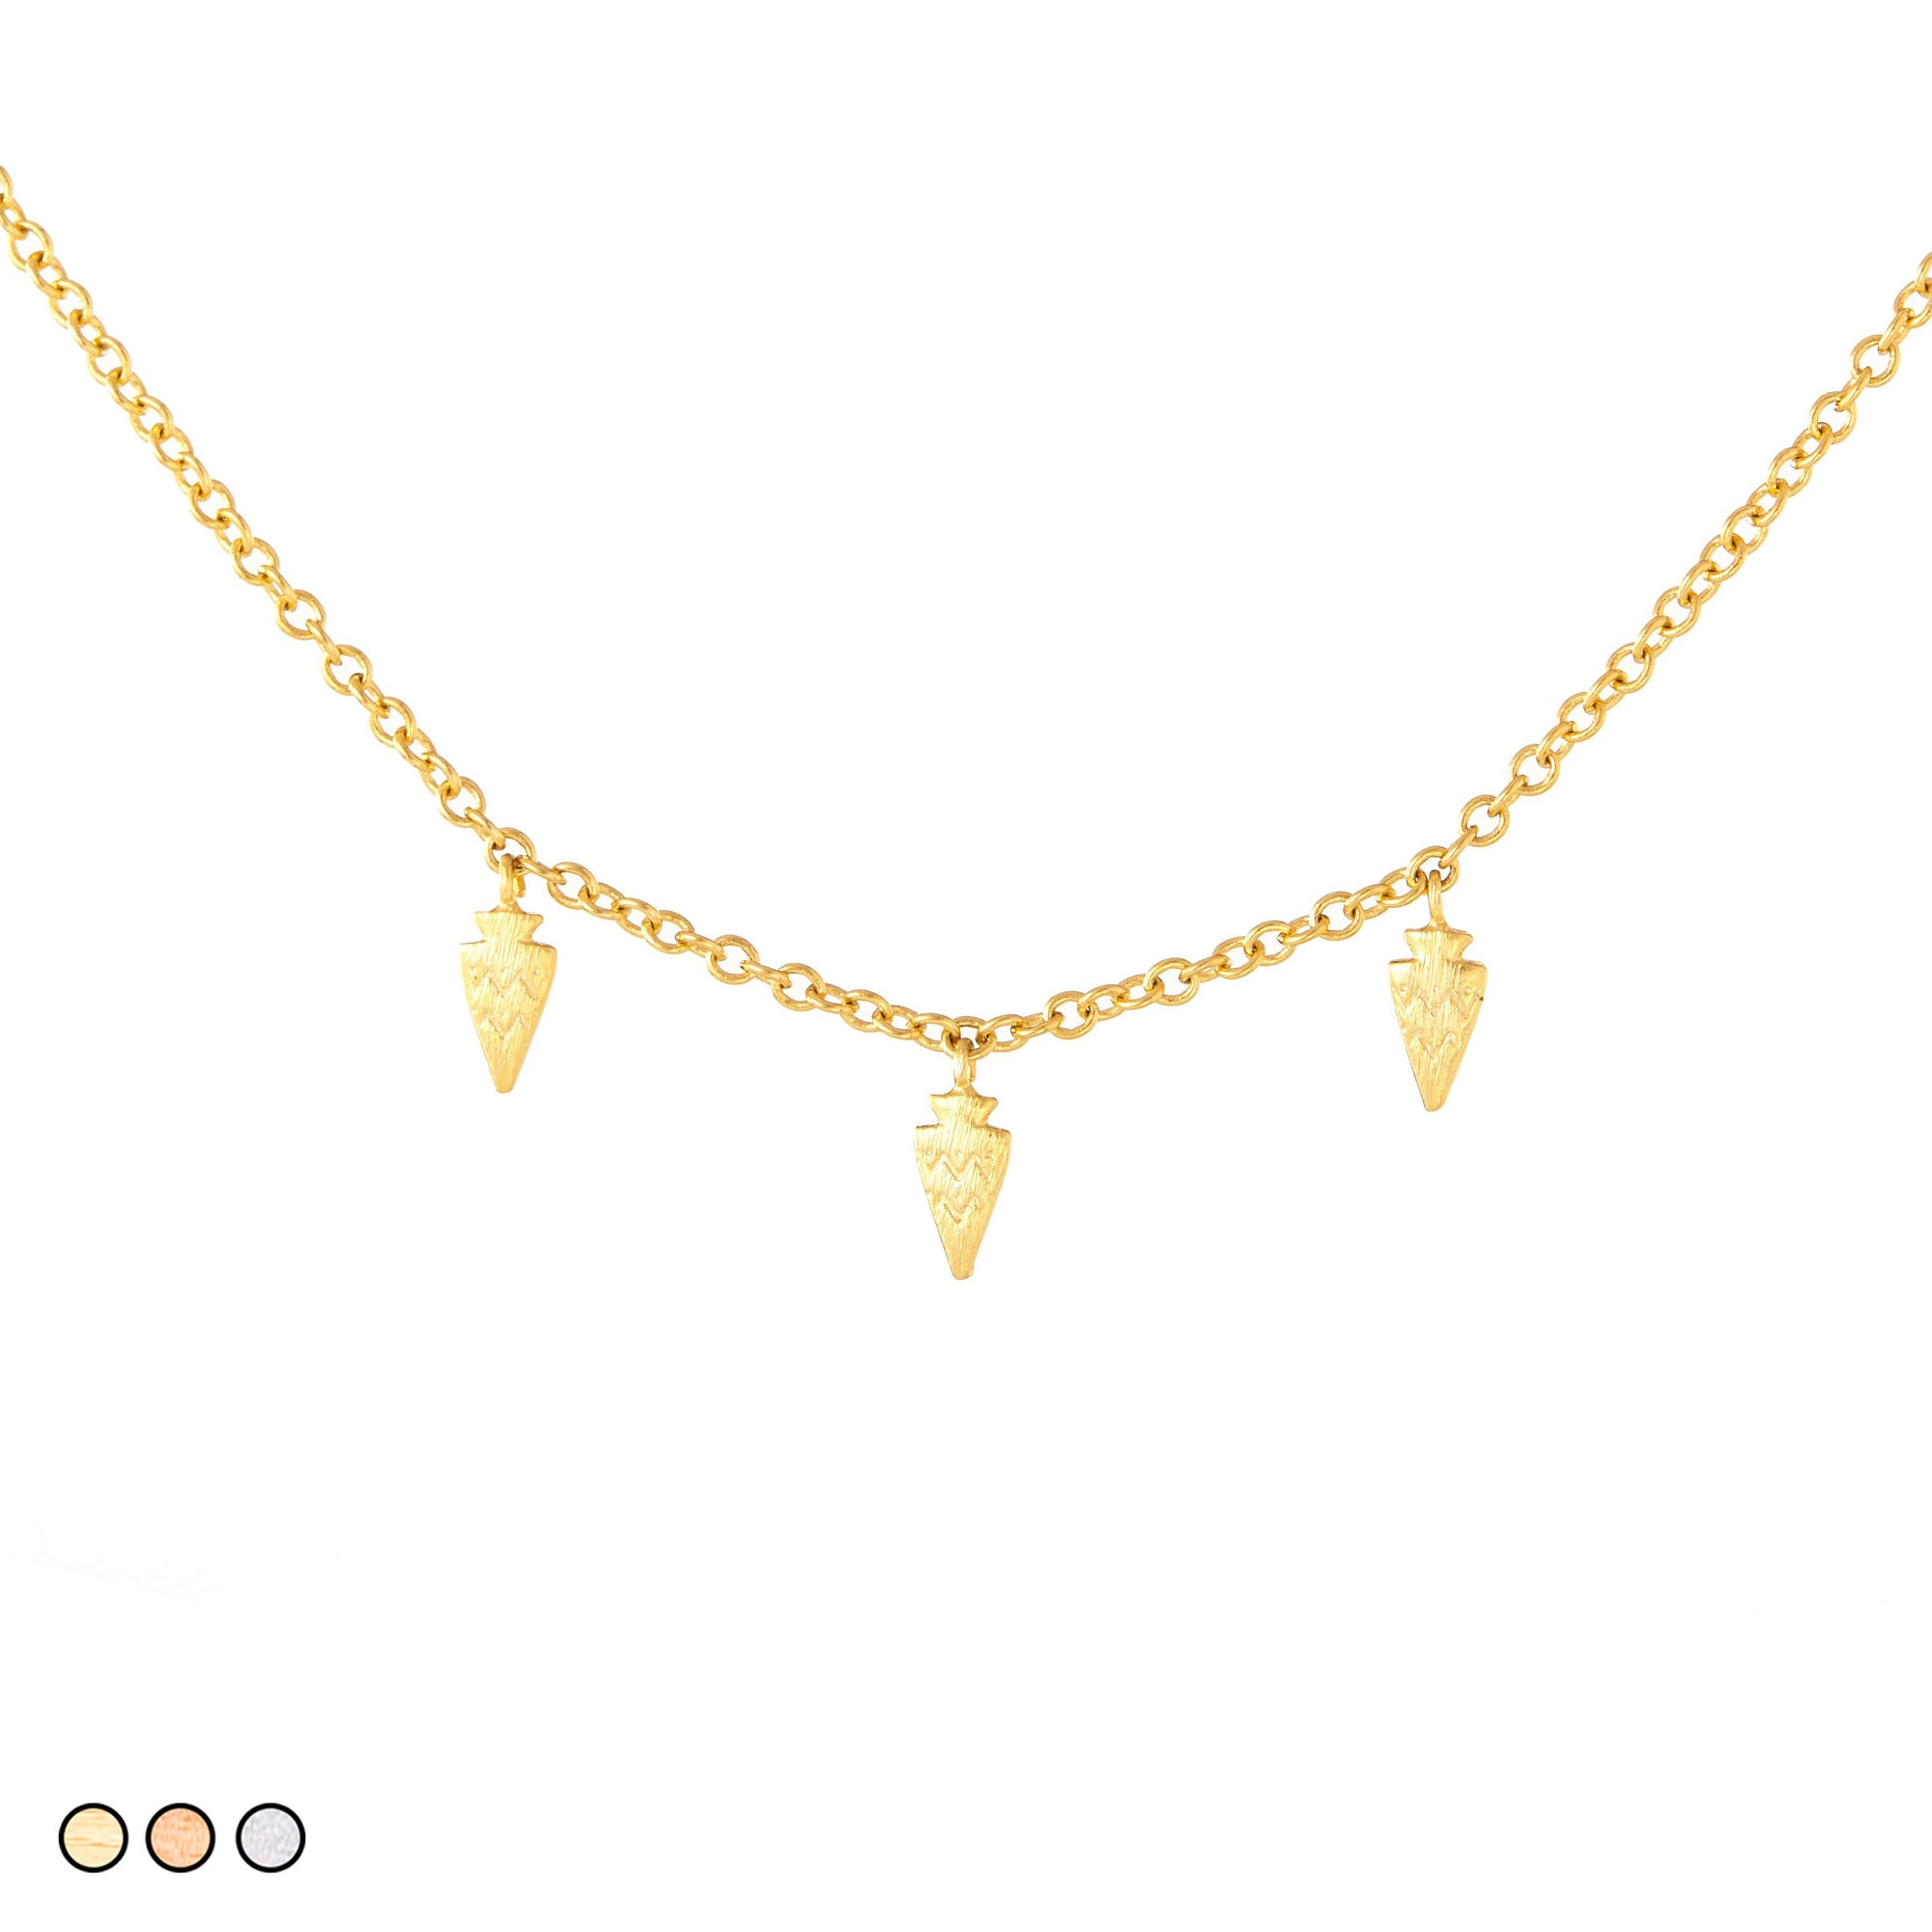 Small Gold Arrowhead Necklace (Gold, Rose Gold, Silver)